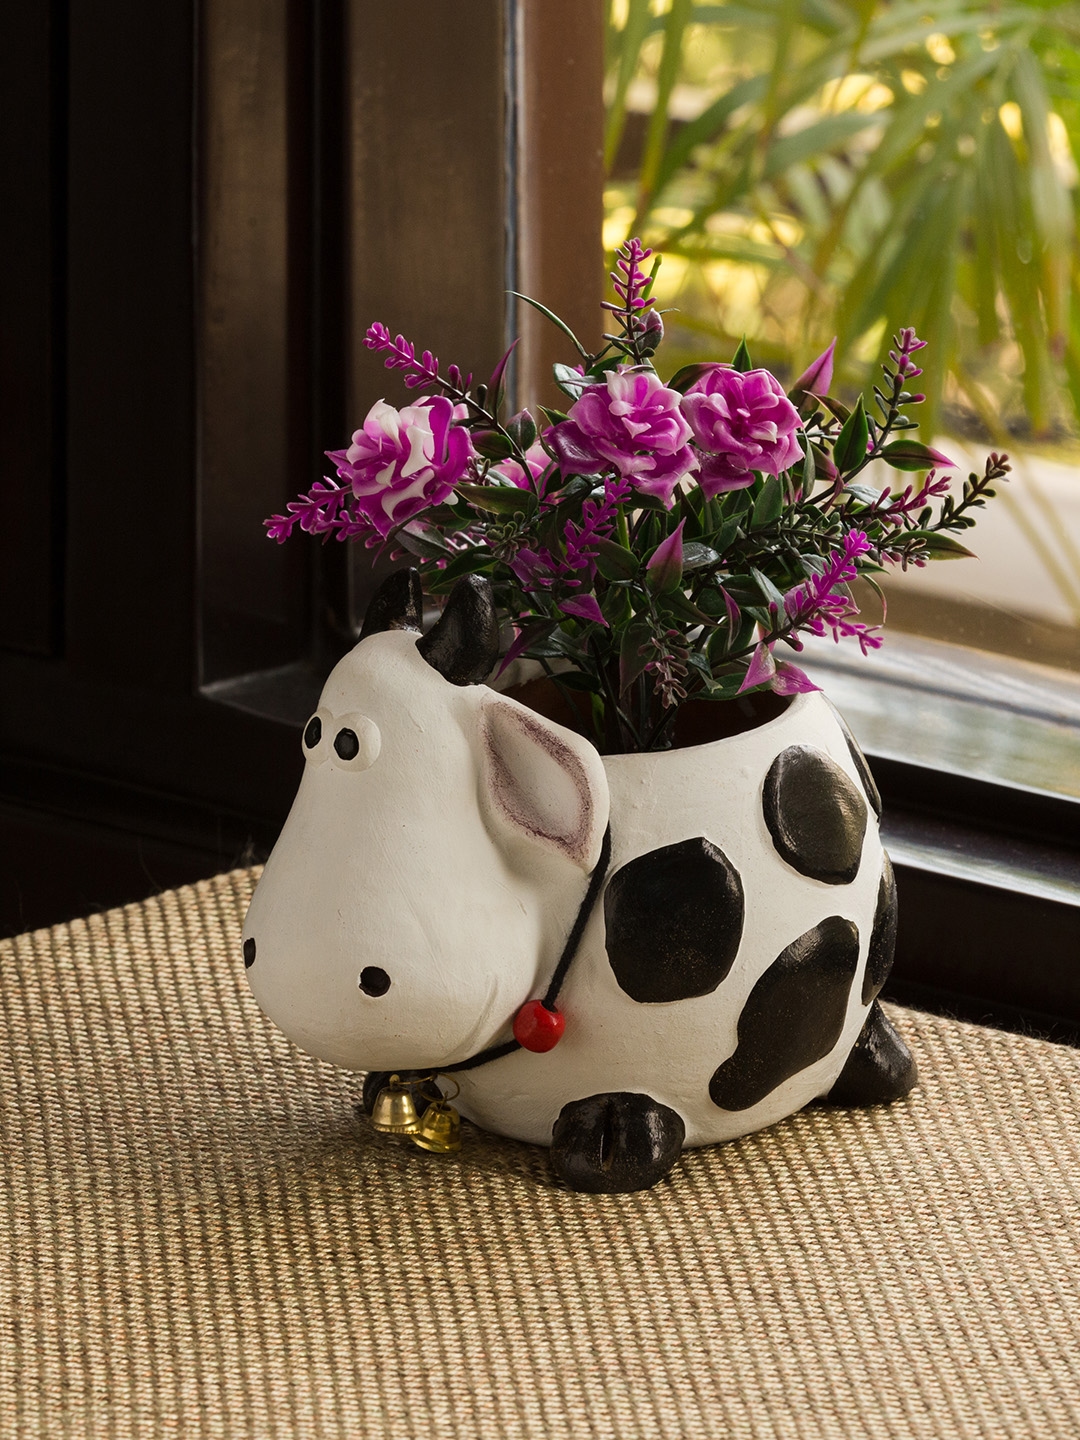 ExclusiveLane 'Planting Moo' Handmade   Hand painted Planter Pot In Terracotta  6 Inch 